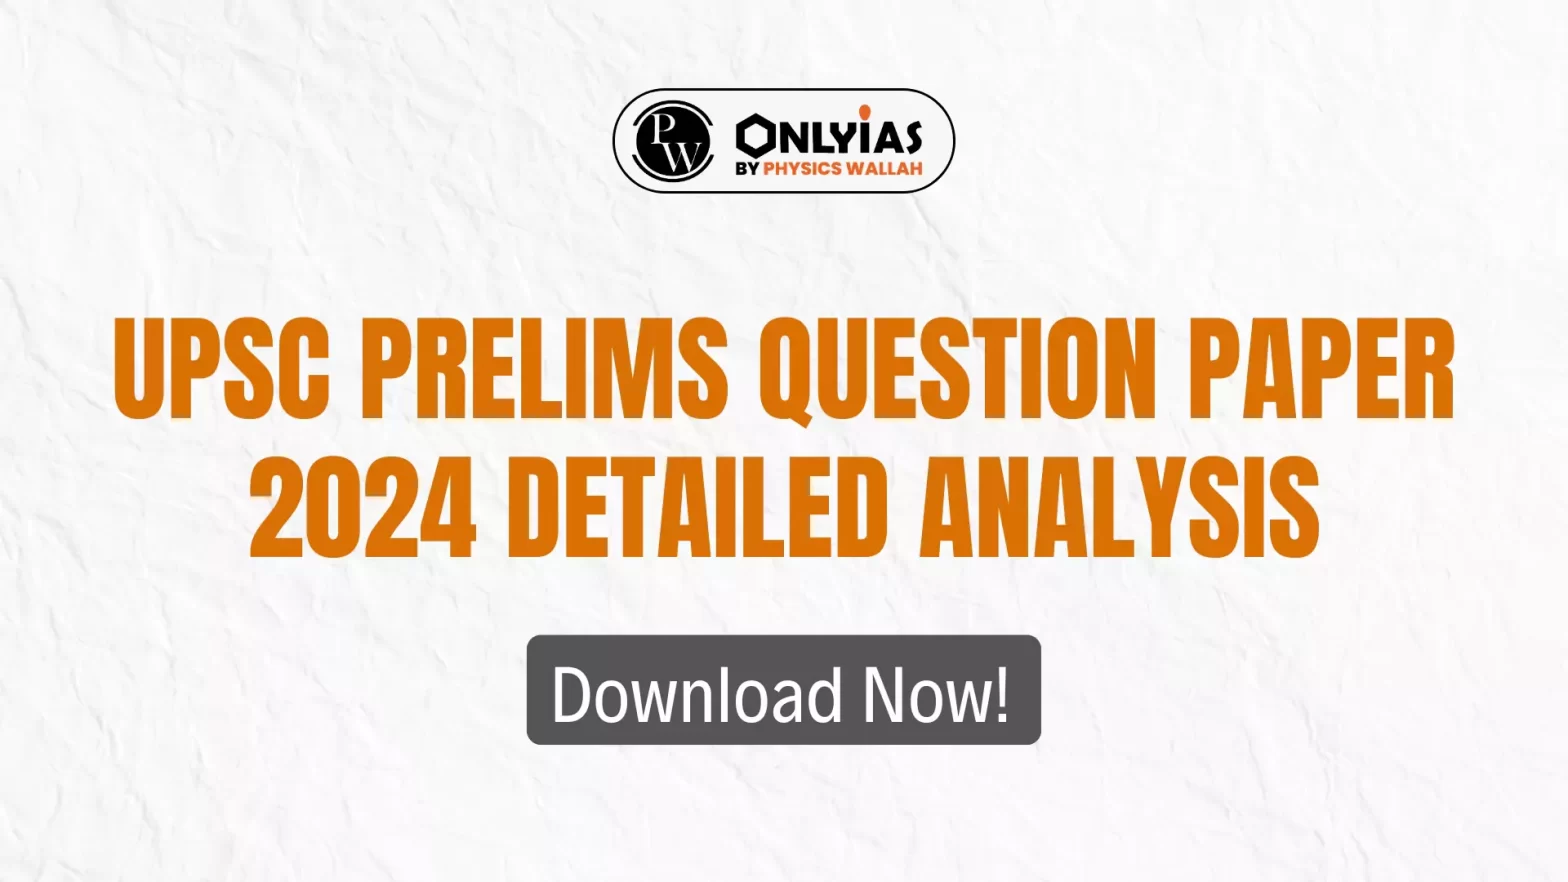 UPSC Prelims Question Paper 2024 Detailed Analysis, Download Now!